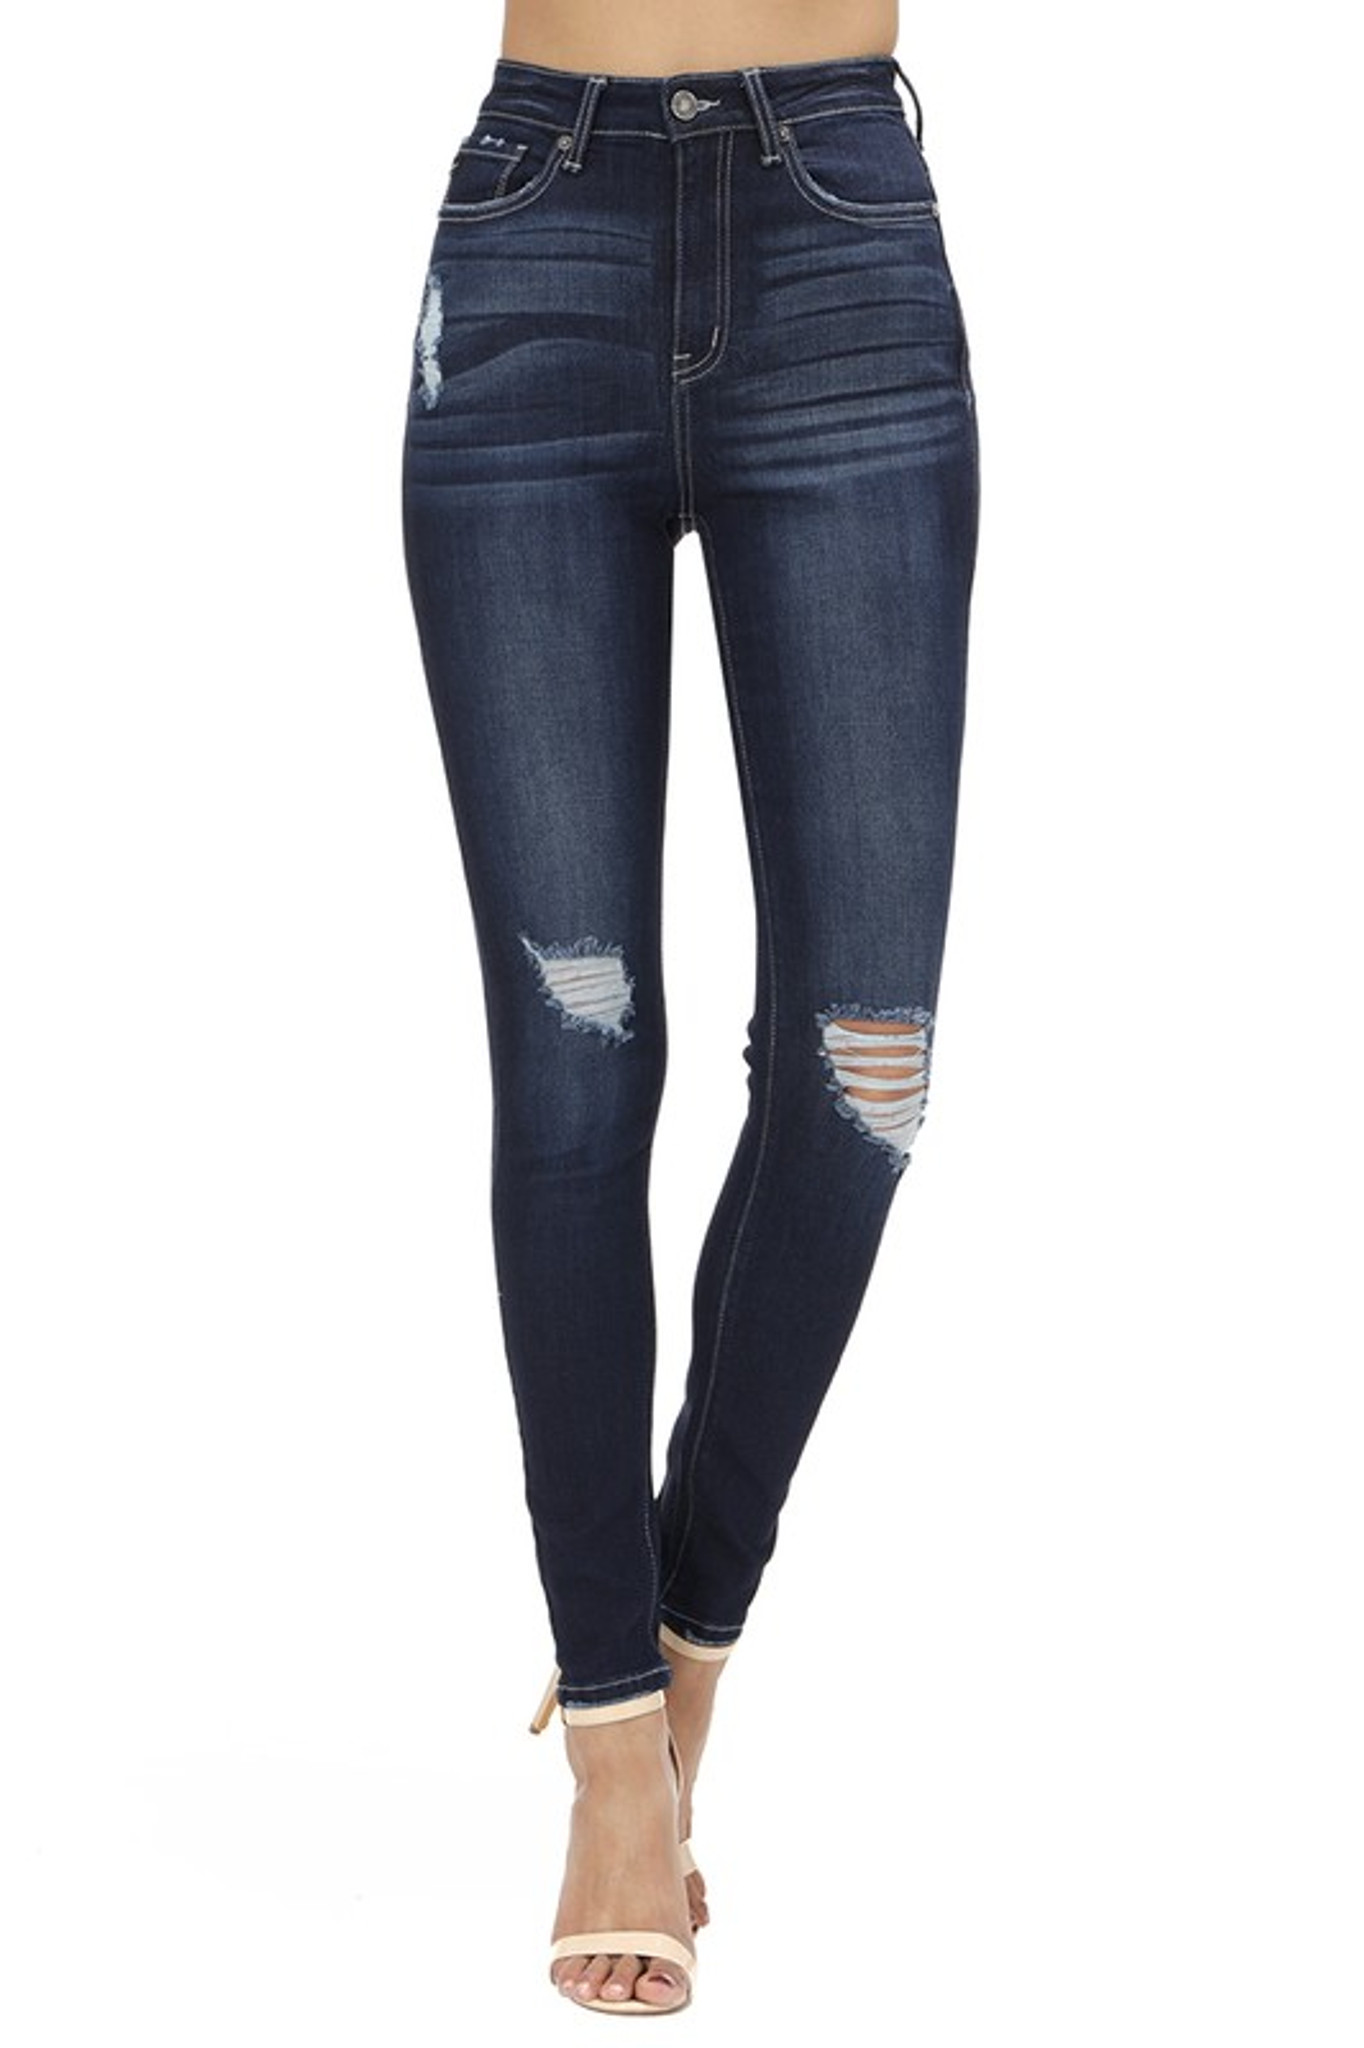 Women's KanCan Jeans, Chanel Rylee, Skinny Dark Wash, Distressed - Chick  Elms Grand Entry Western Store and Rodeo Shop